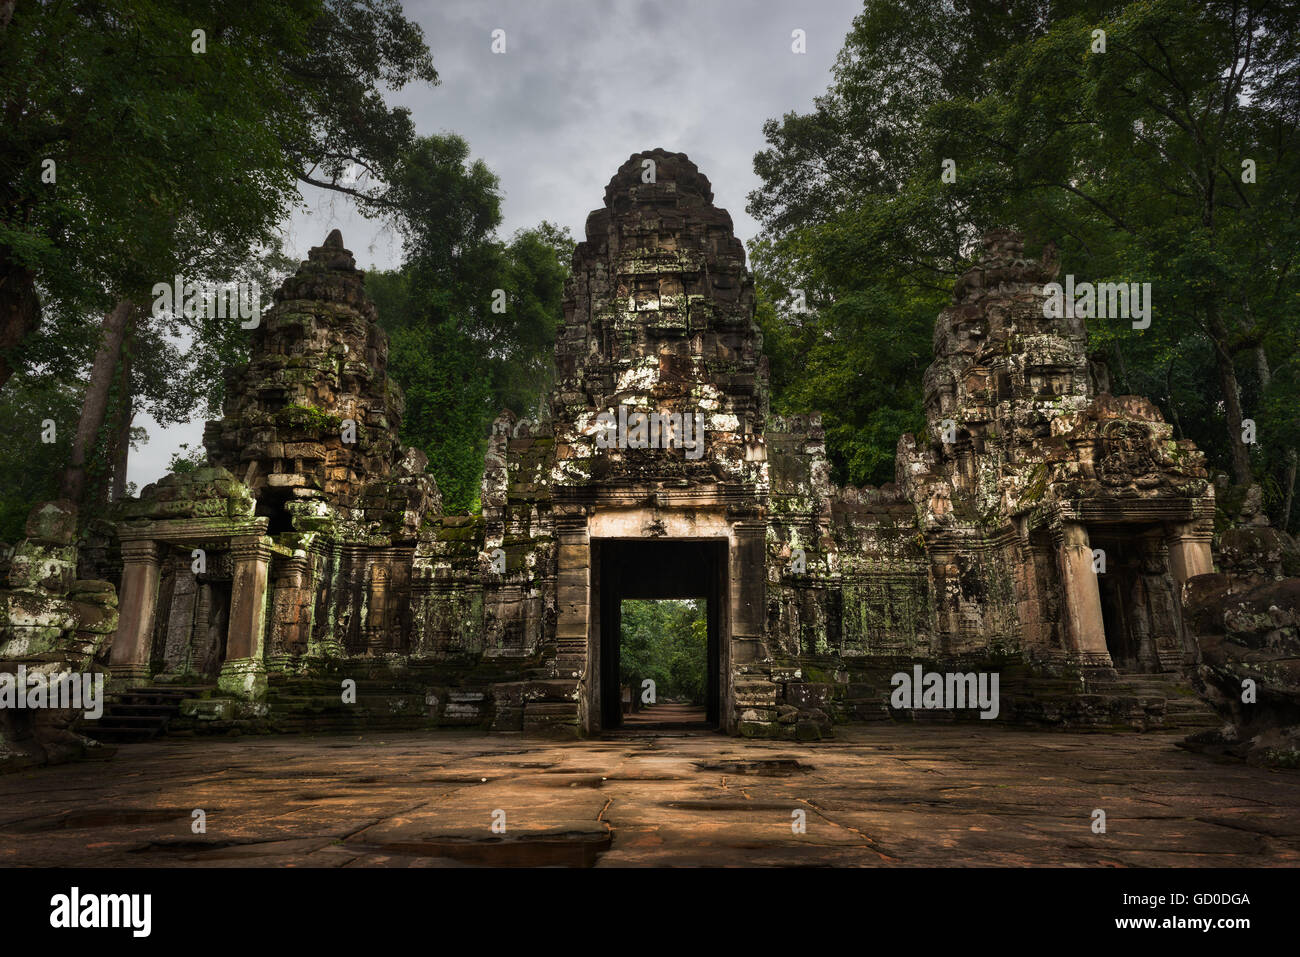 The foreboding entrance to Preah Khan temple in Siem Reap, Cambodia. Stock Photo